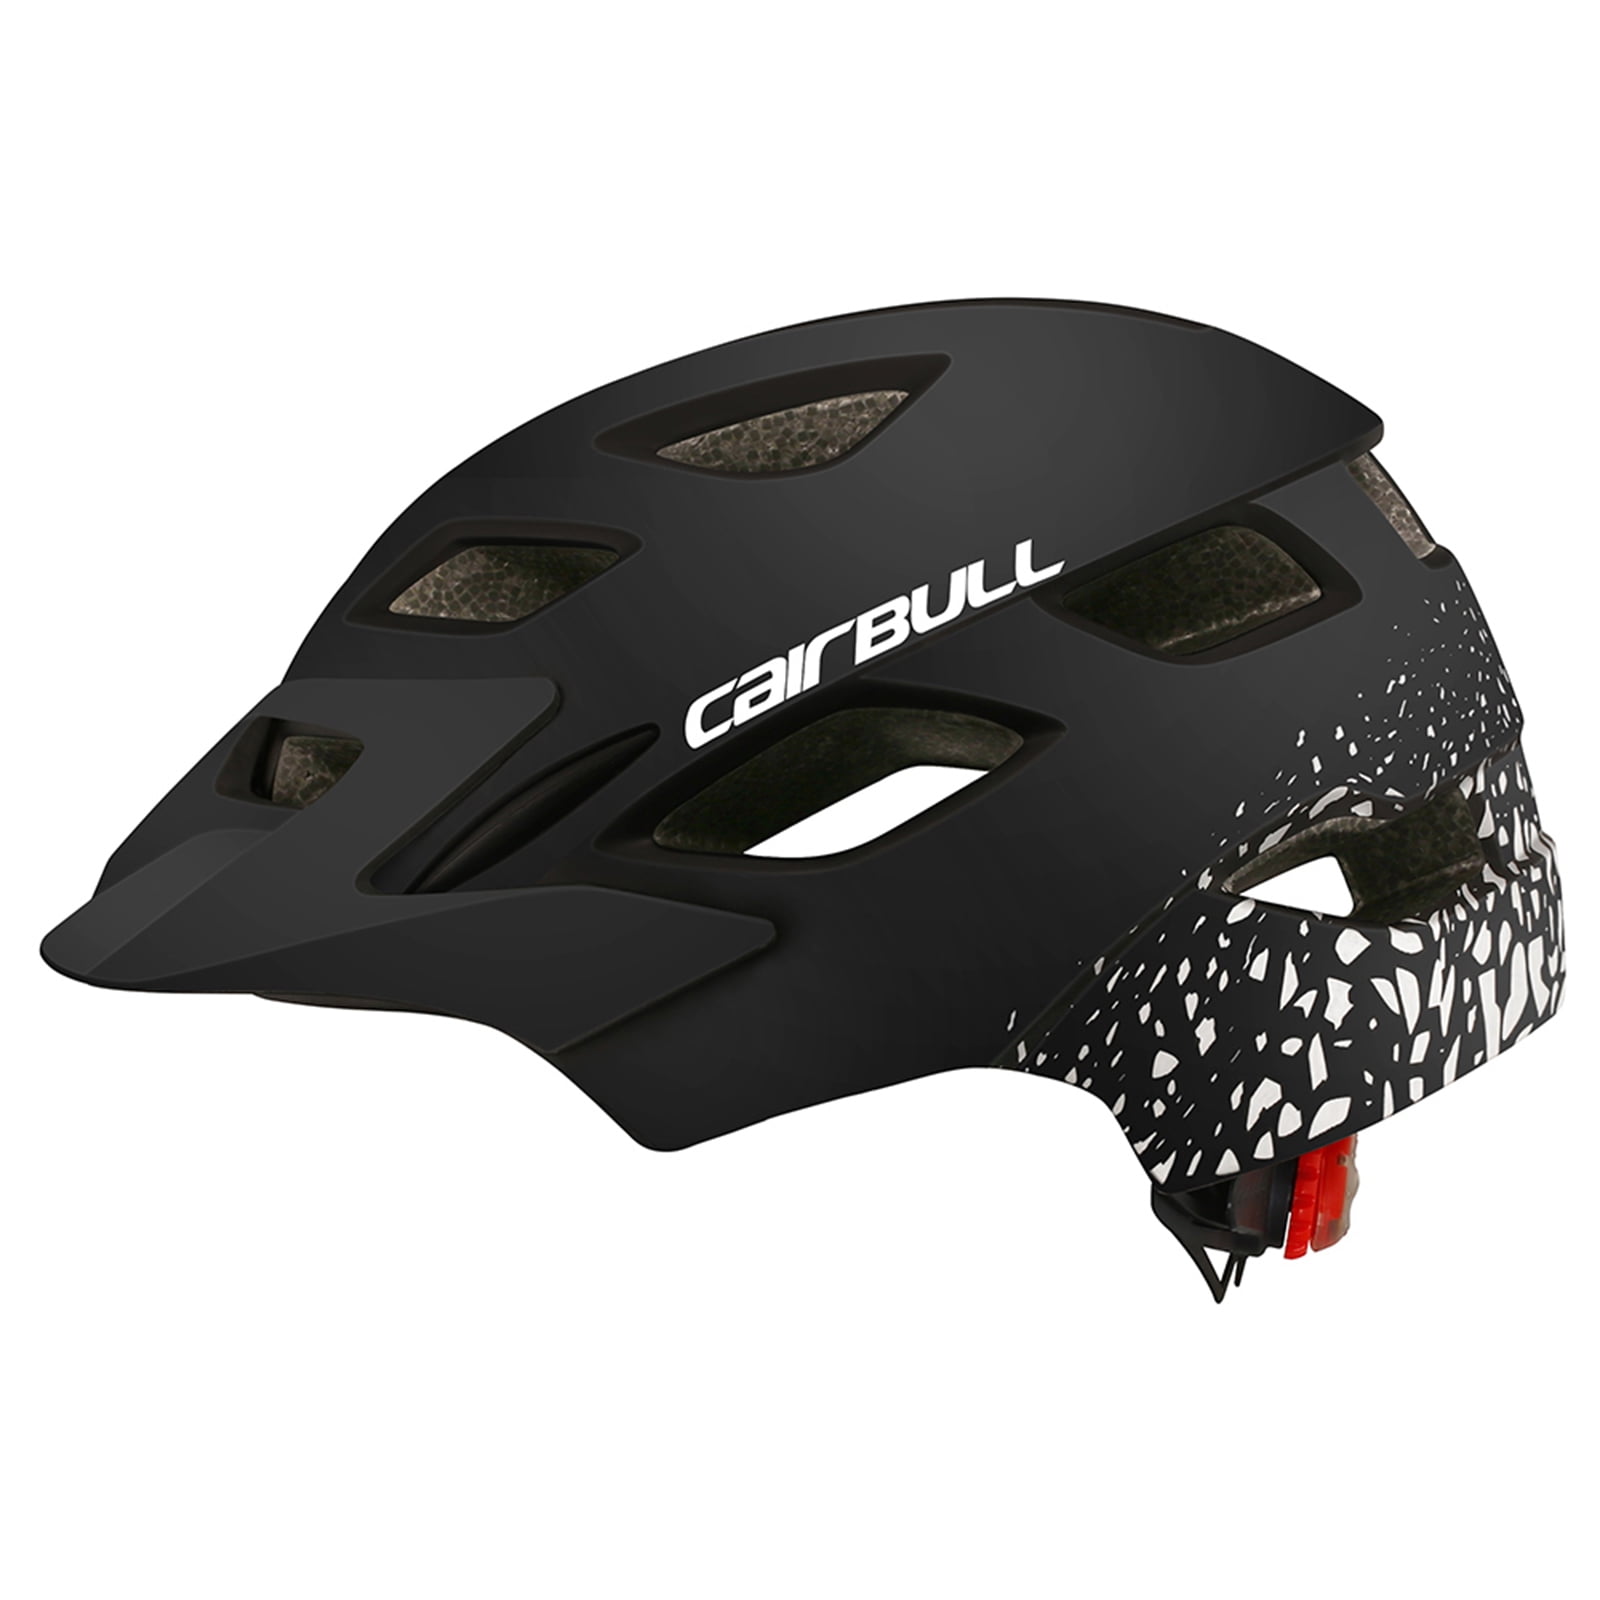 Details about   JOYTRACK Children Cycling Helmet with Taillight Child Skating Riding Safety 